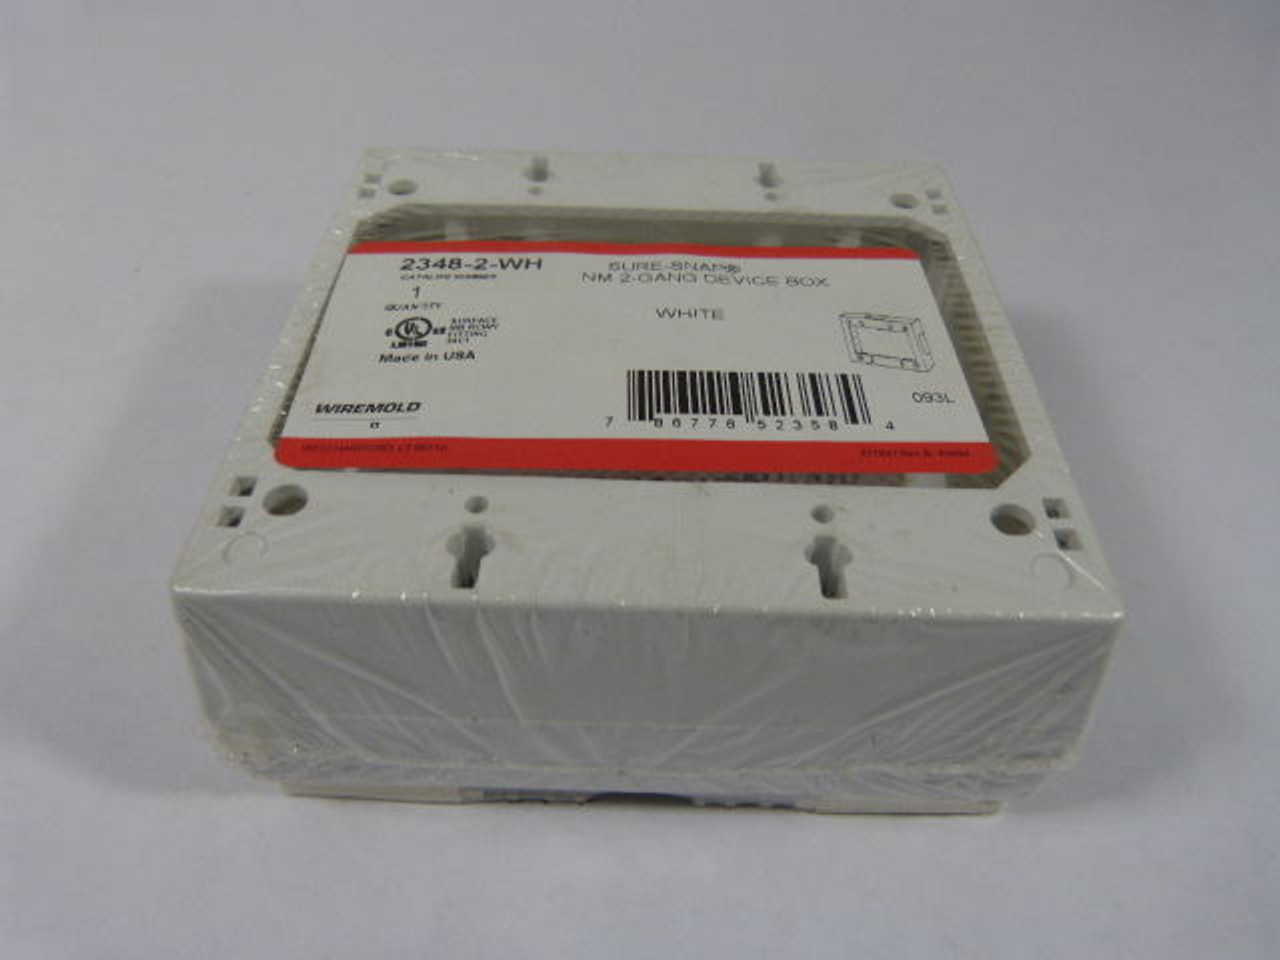 Wiremold 2348-2-WH Deep Two-Gang Device Box - White ! NEW !